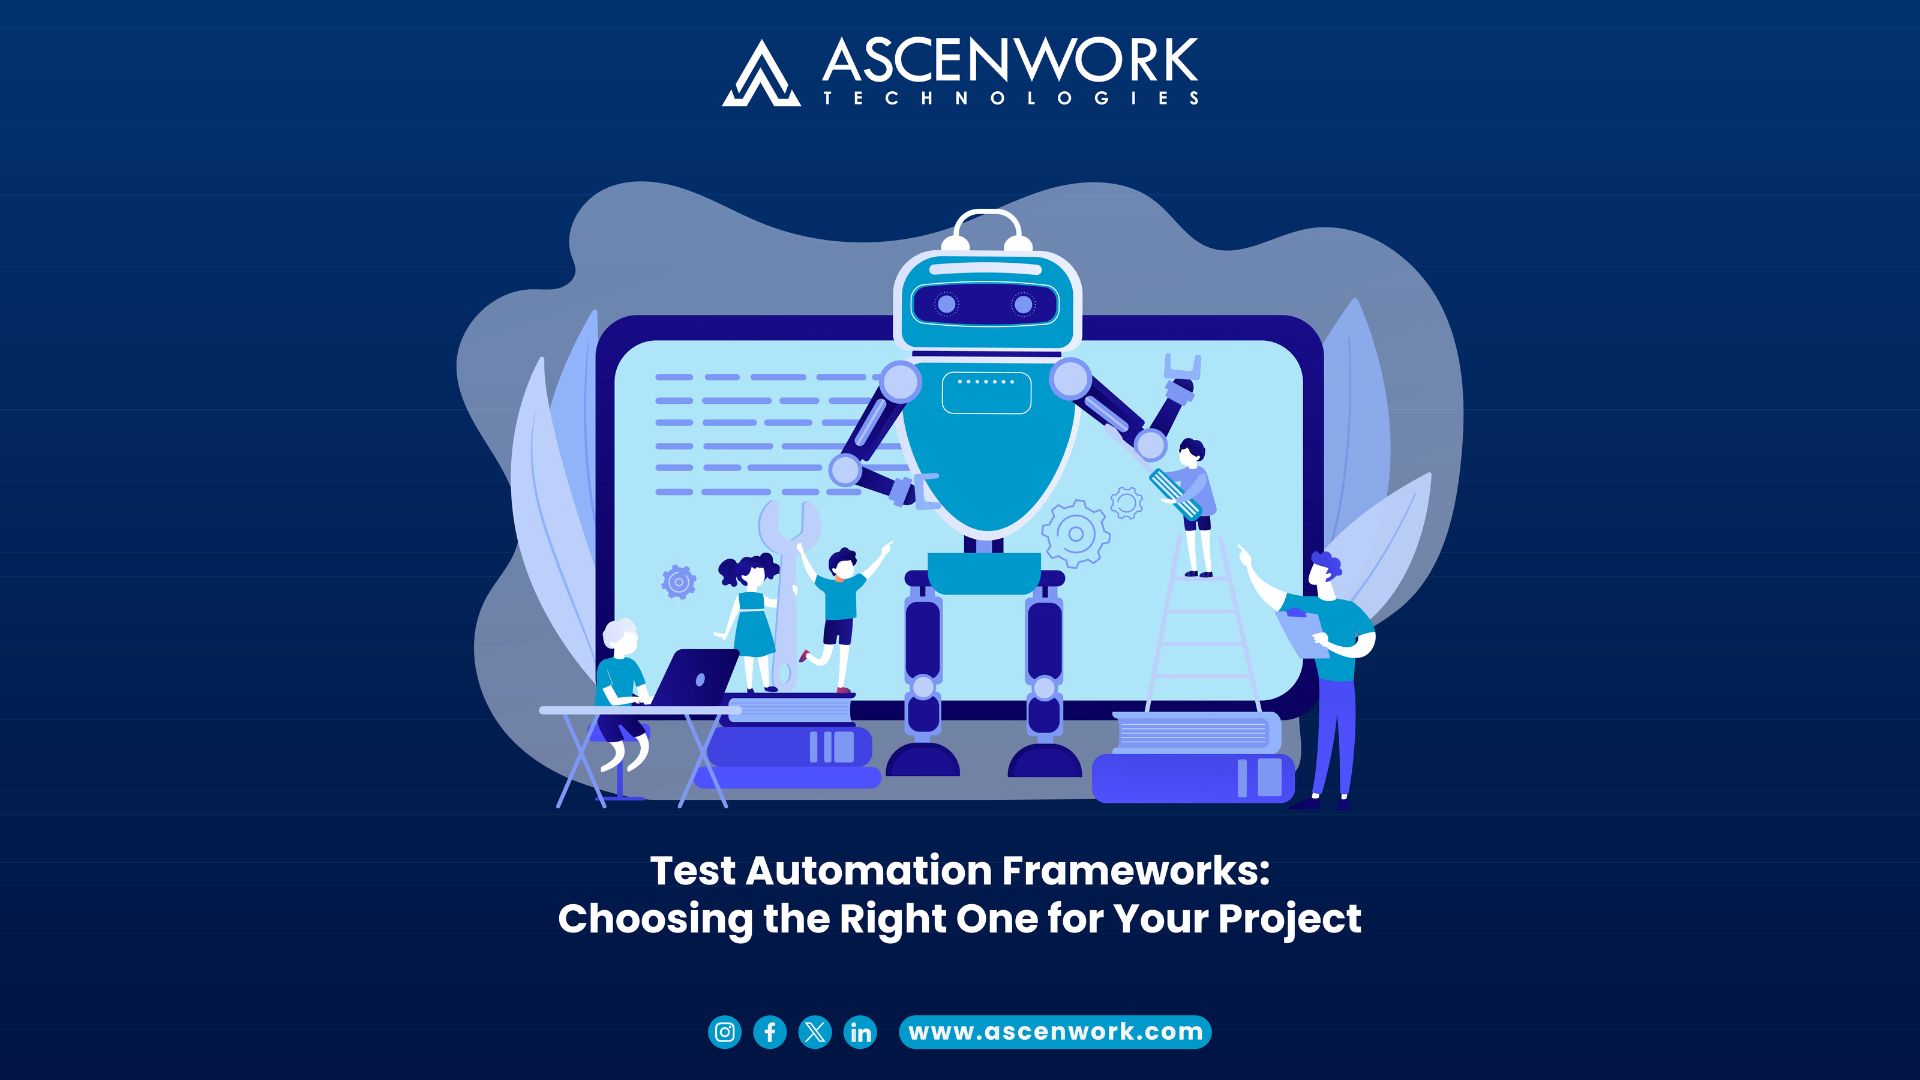 Test Automation Frameworks: Choosing the Right One for Your Project